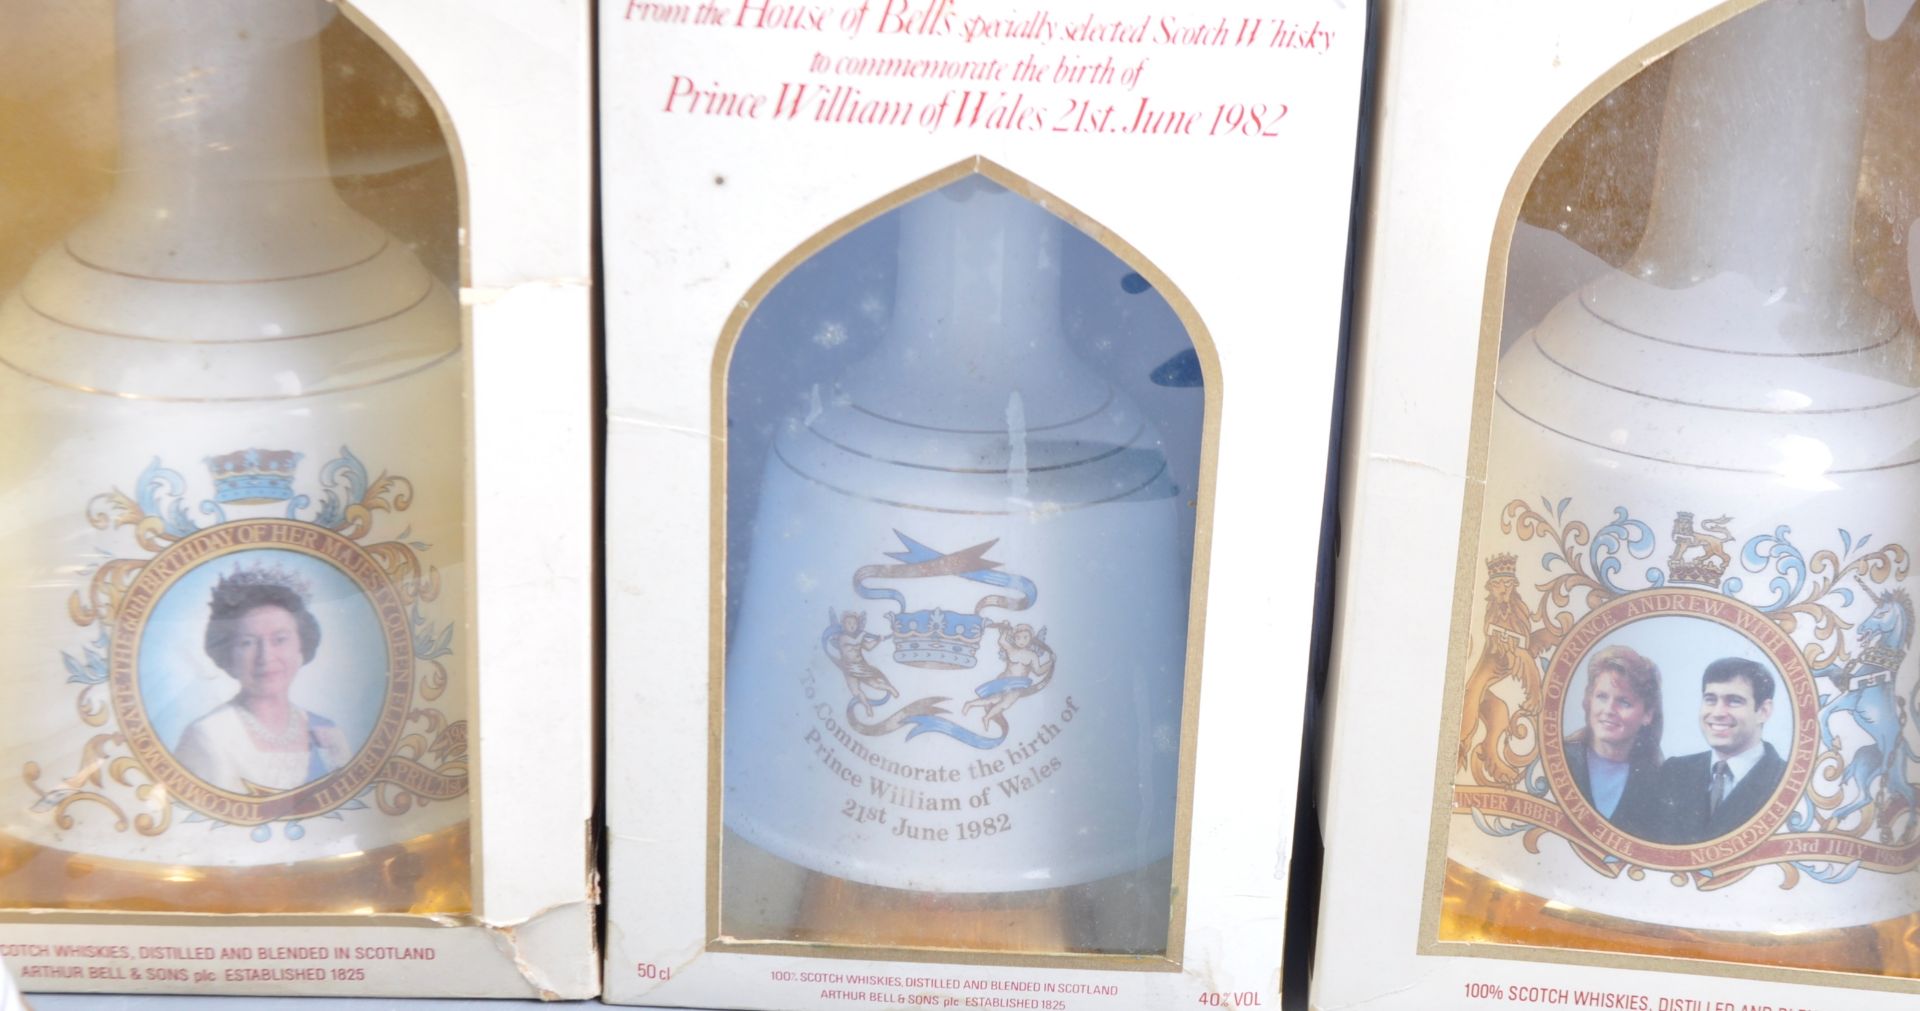 COLLECTION OF BELLS WHISKY COMMEMORATIVE DECANTERS - Image 2 of 3